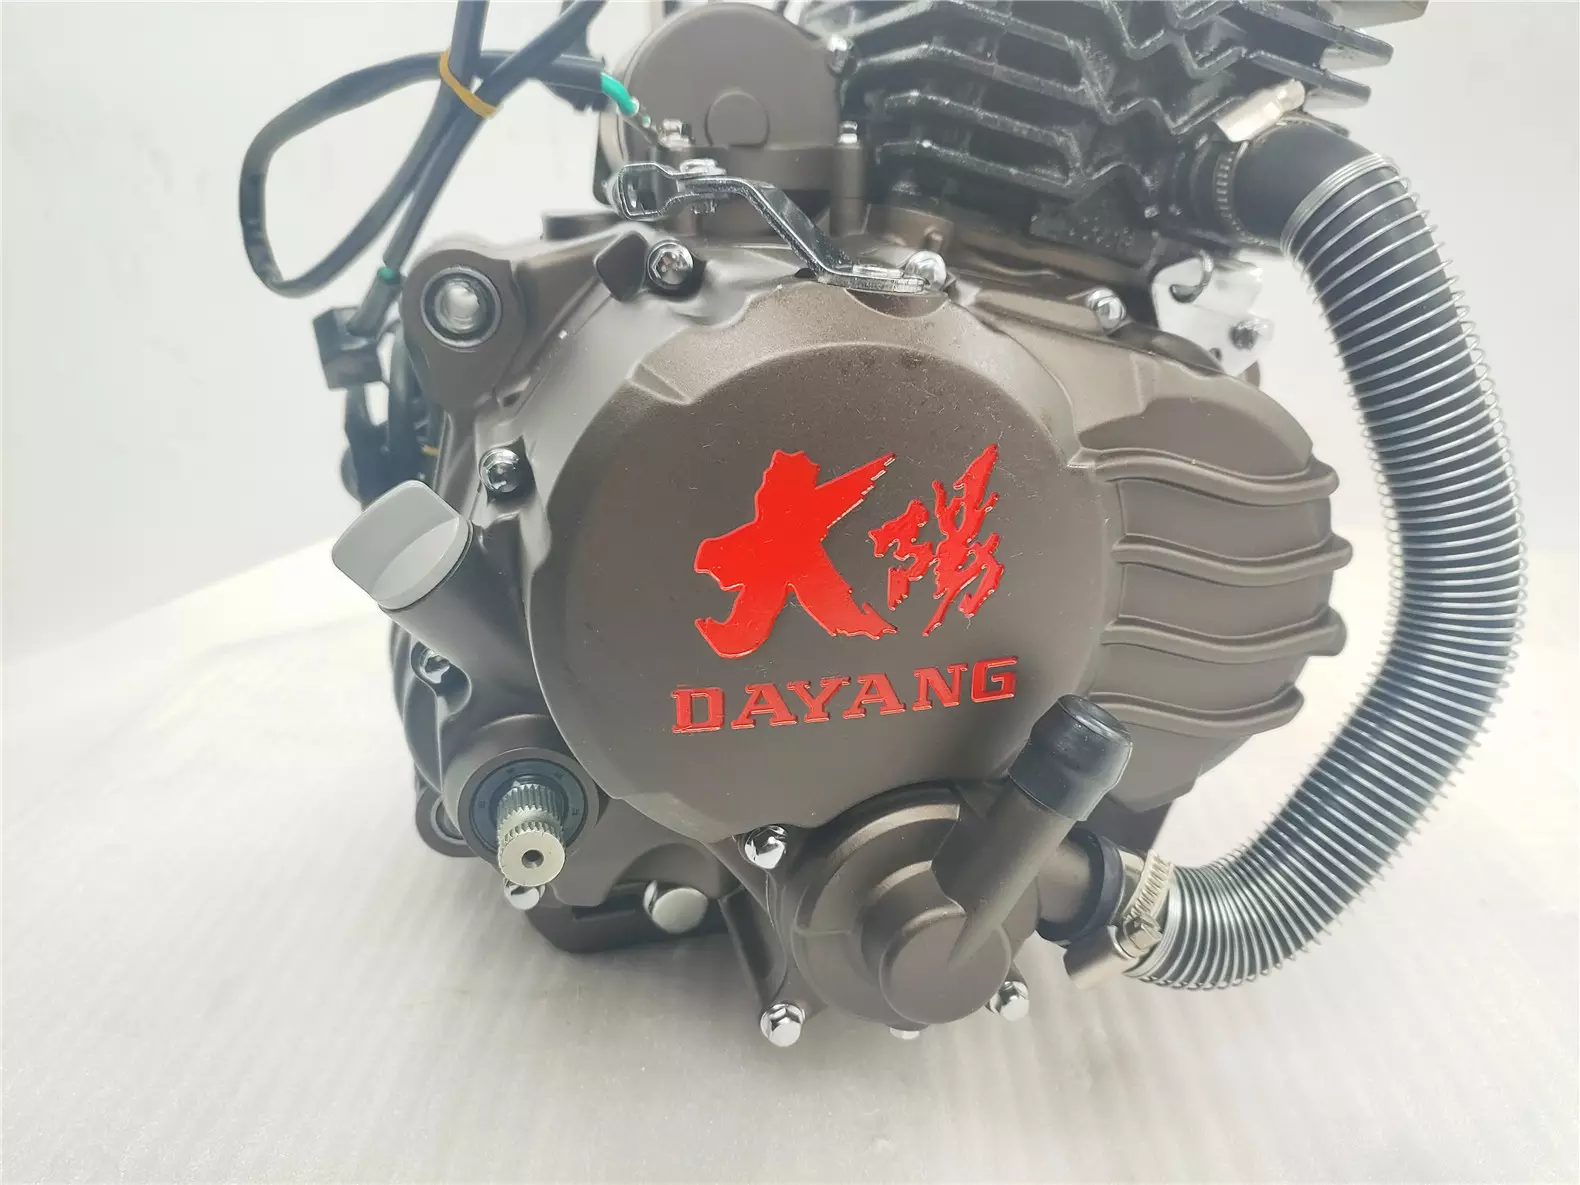 DAYANG 250cc Motorcycle Engine Single Cylinder 4 Stroke Style Wolf water-cooled Method Origin Ignition CDI Start Place Kick